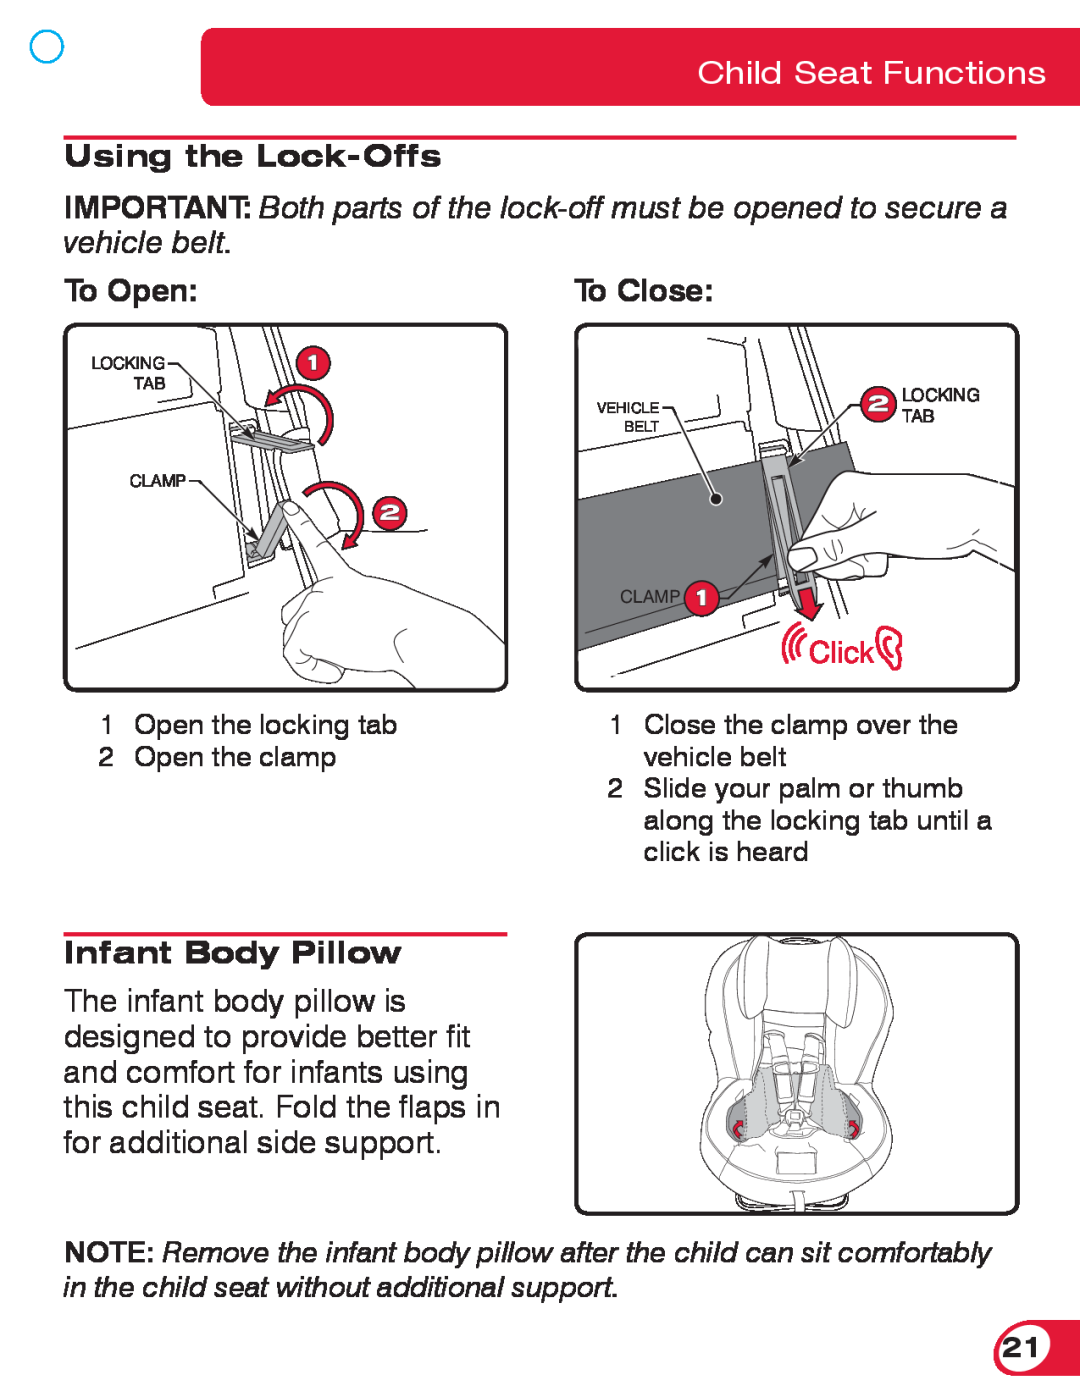 Britax 70 CS manual Using the Lock-Offs, To Open, To Close, Infant Body Pillow, Child Seat Functions, Locking, Clamp 